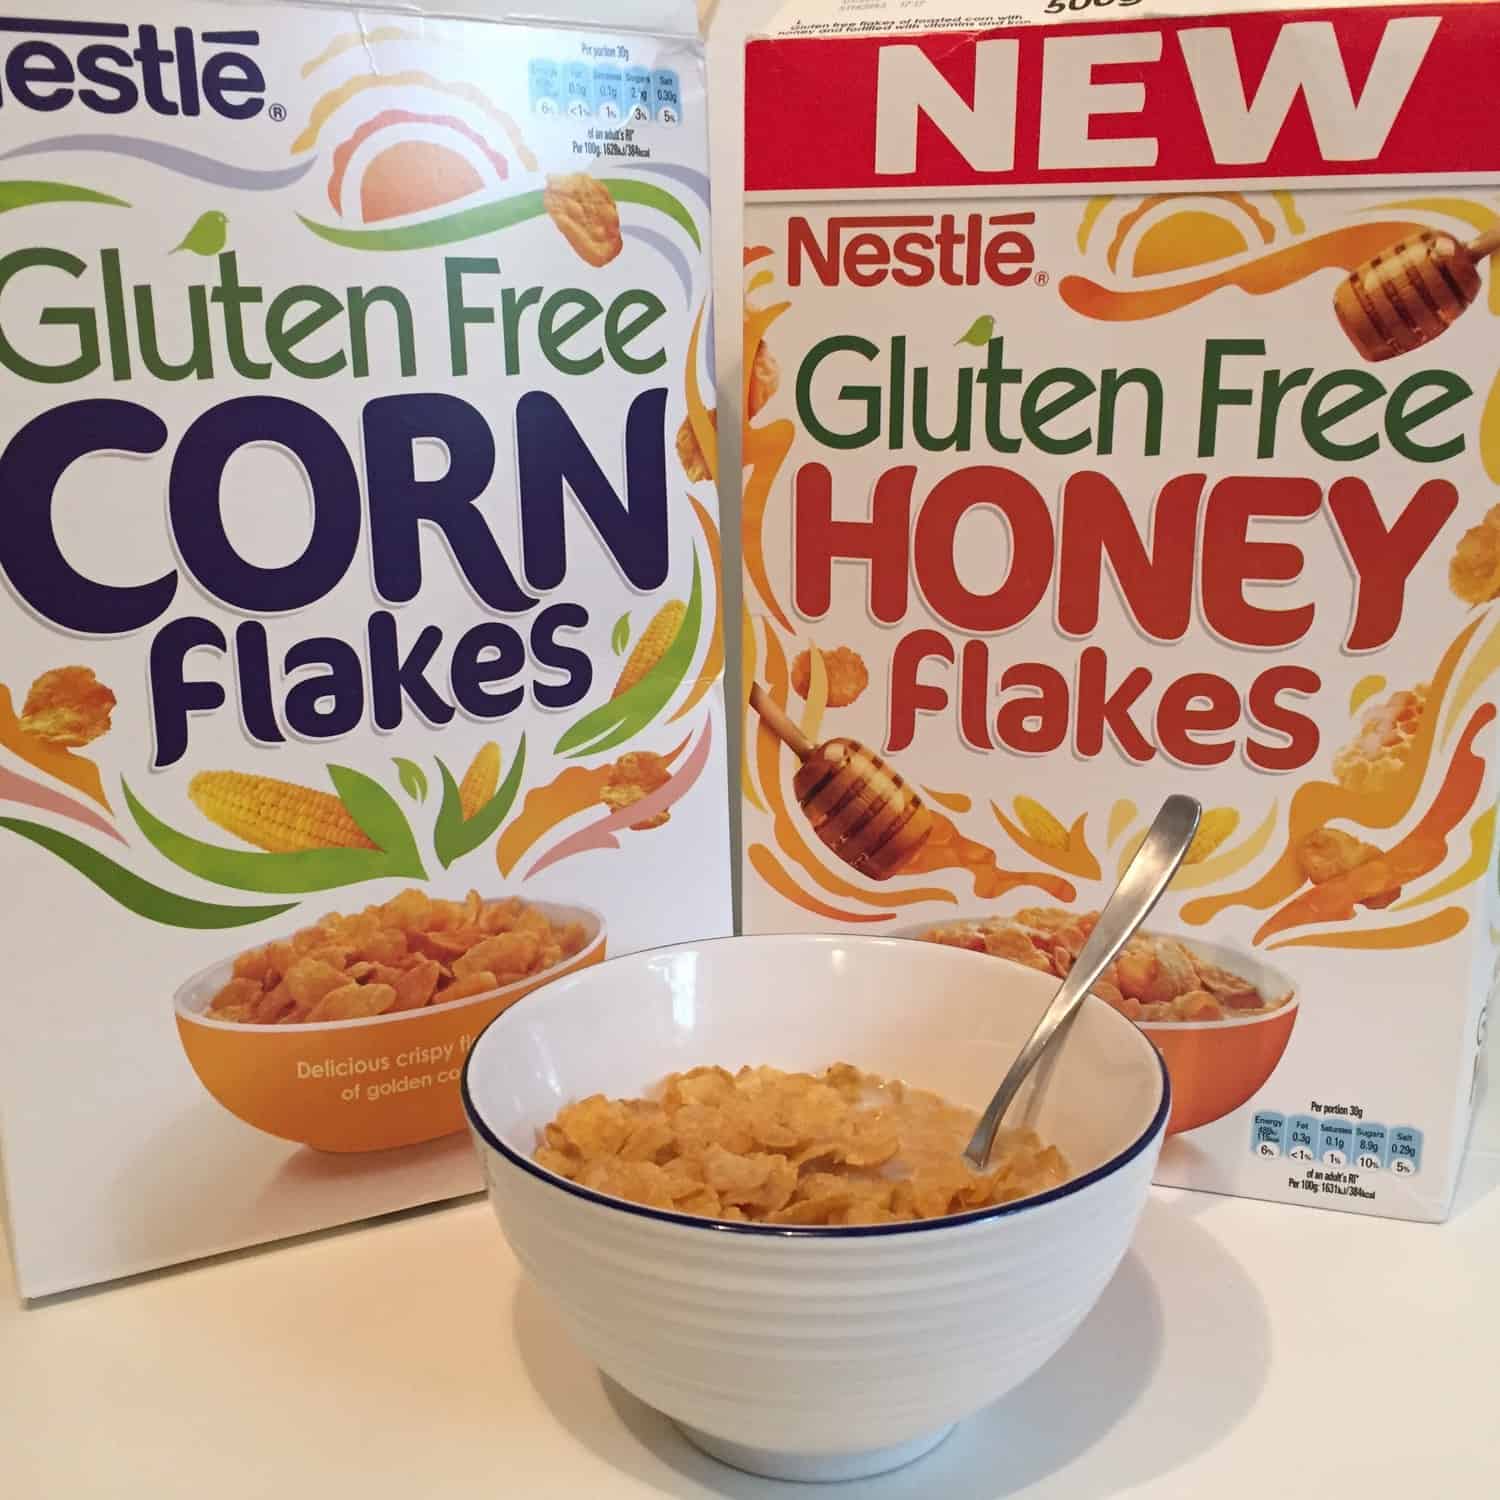 REVIEW: Nestle Gluten Free Cereal